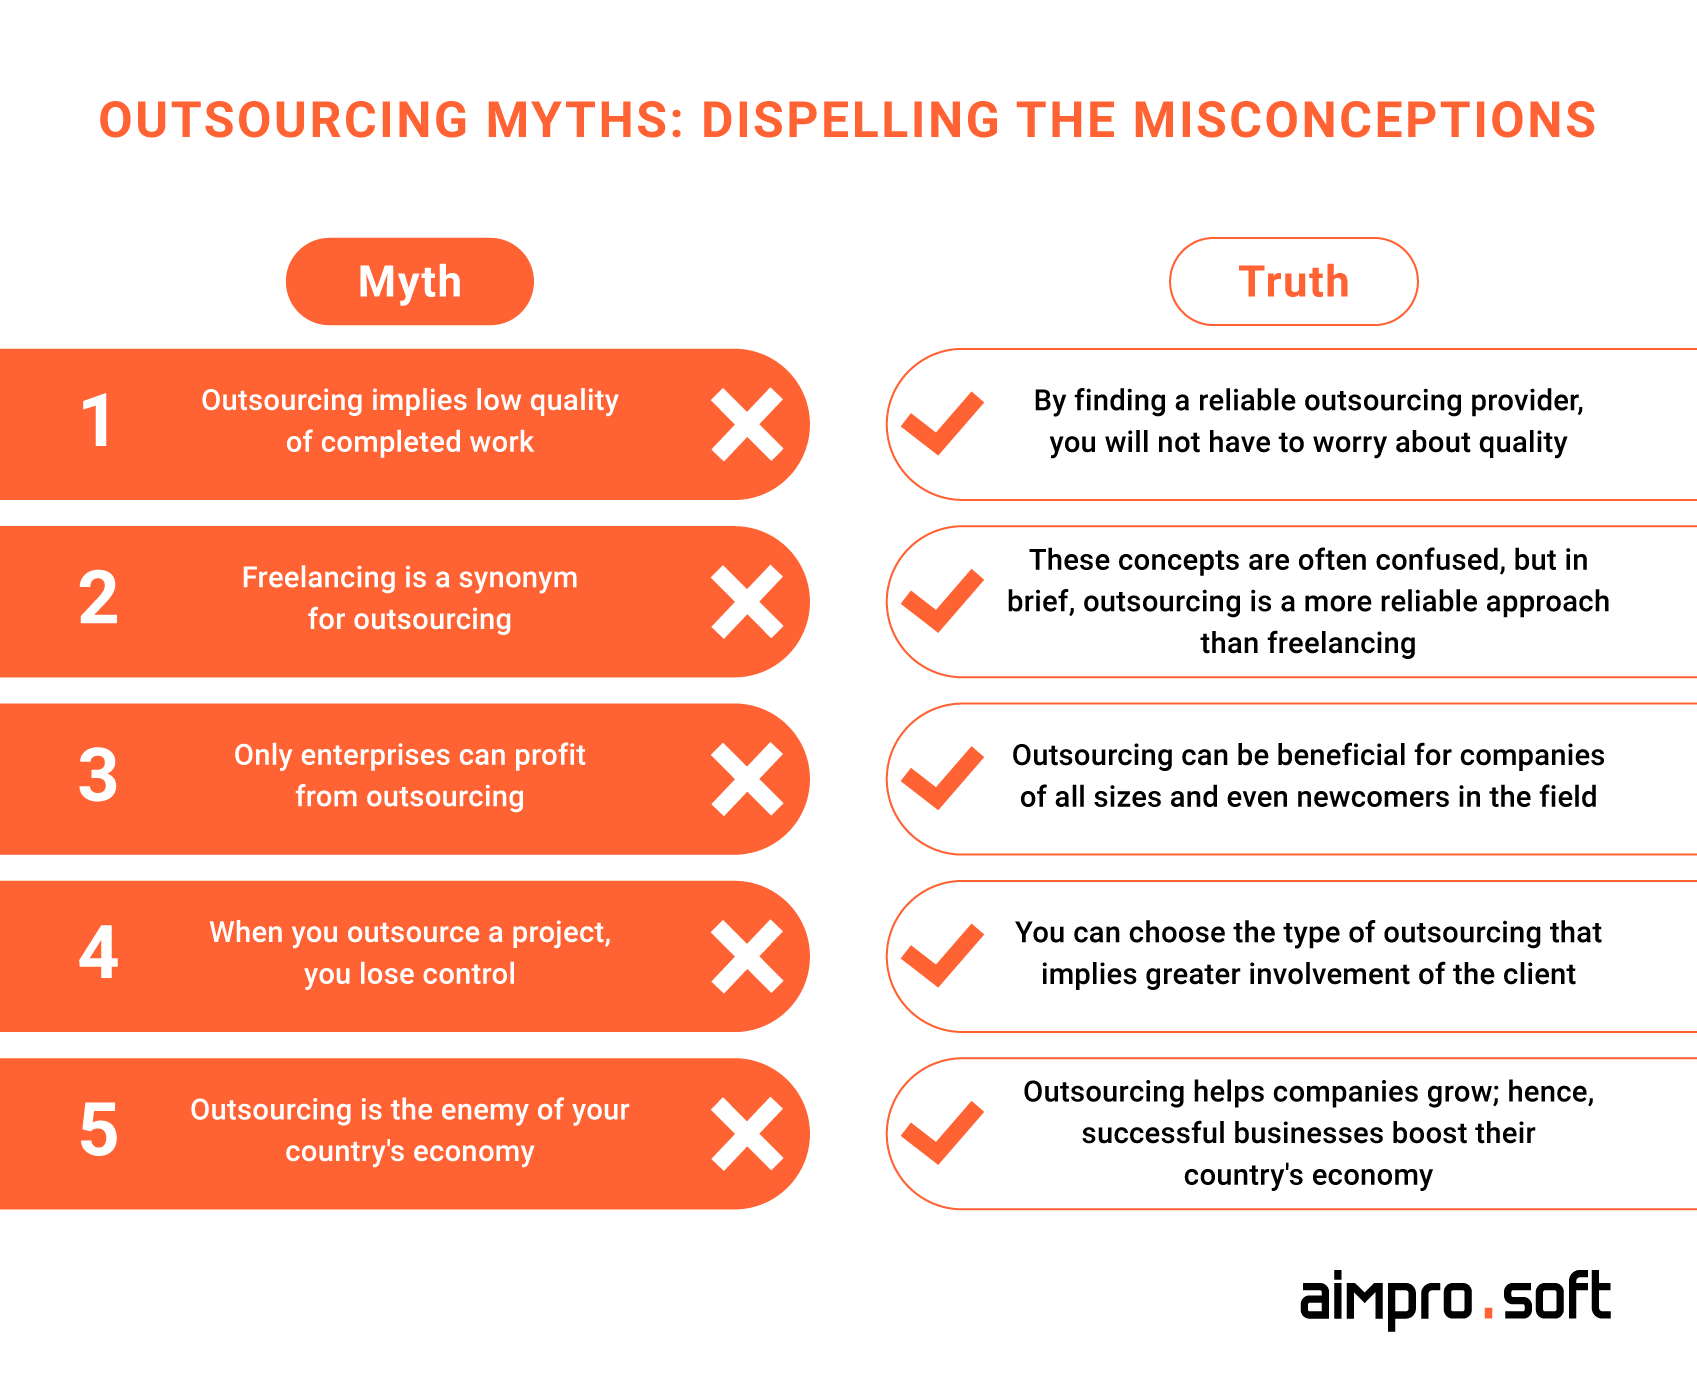 Outsourcing myths